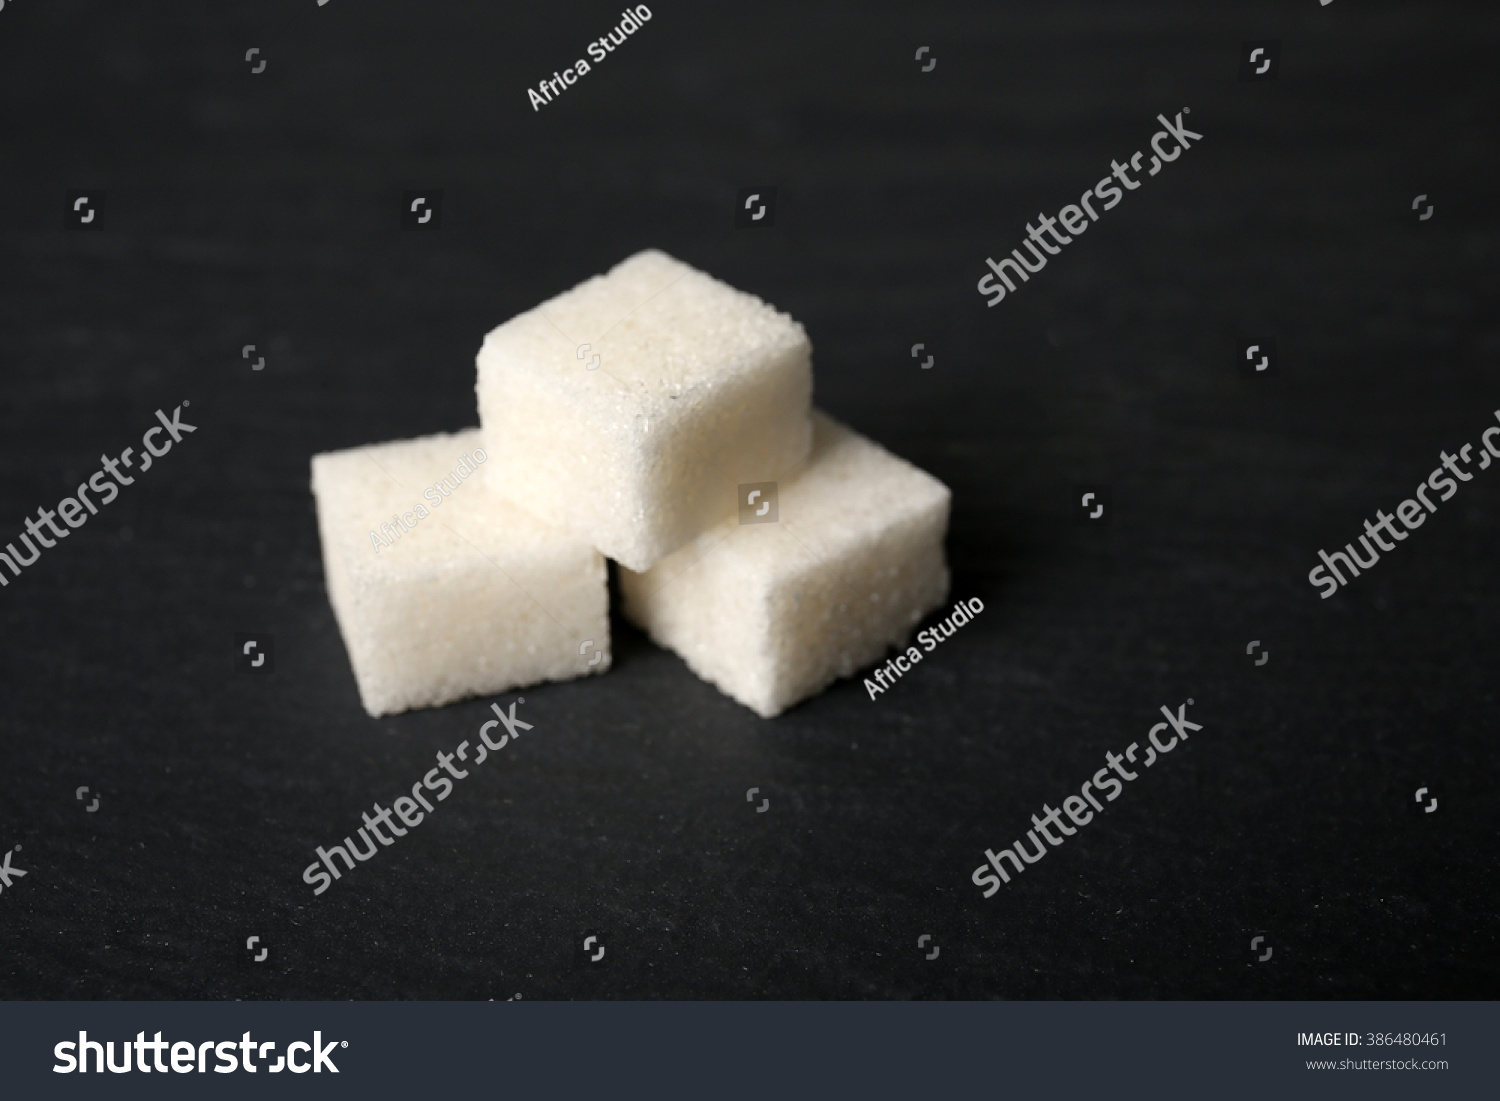 Pile Of Sugar Cubes On The Table Stock Photo 386480461 : Shutterstock